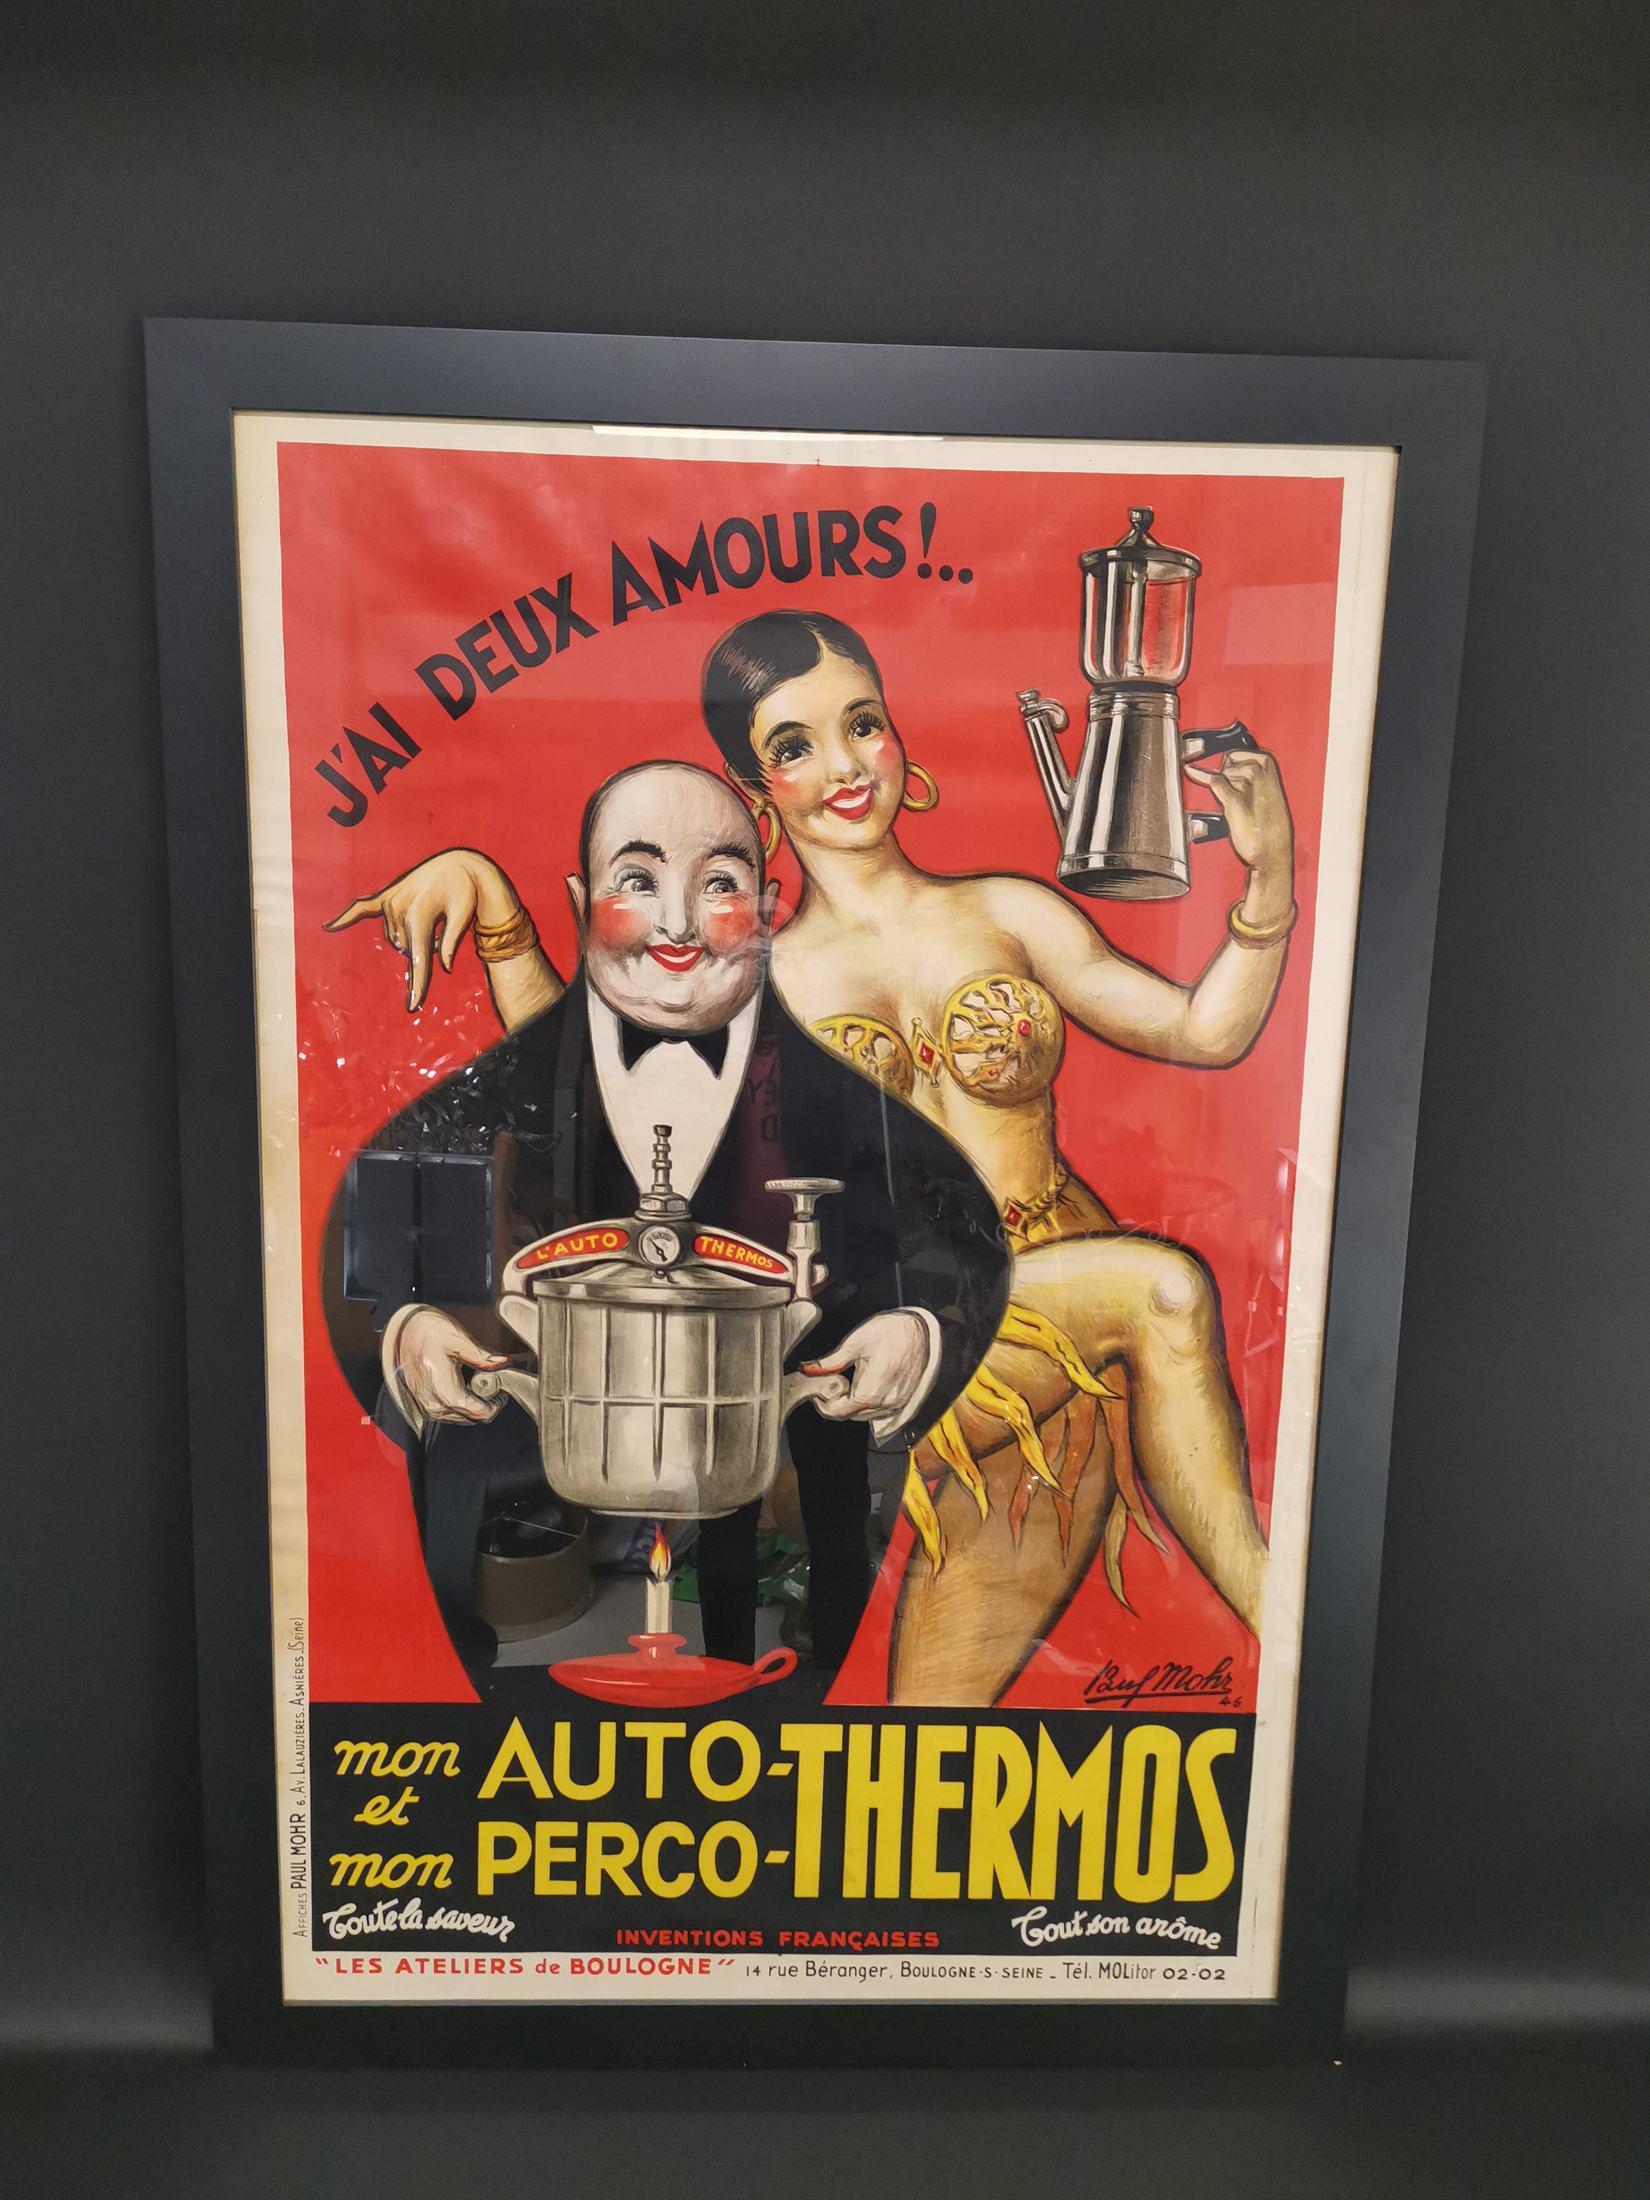 J'ai Deux Amour (“I have two loves”): the Auto-Thermos and Perco-thermos coffee makers! 
A spectacular, bright and daring stone lithograph from 1946 created by artist Paul Mohr. 
Featuring the iconic Josephine Baker, this vintage French